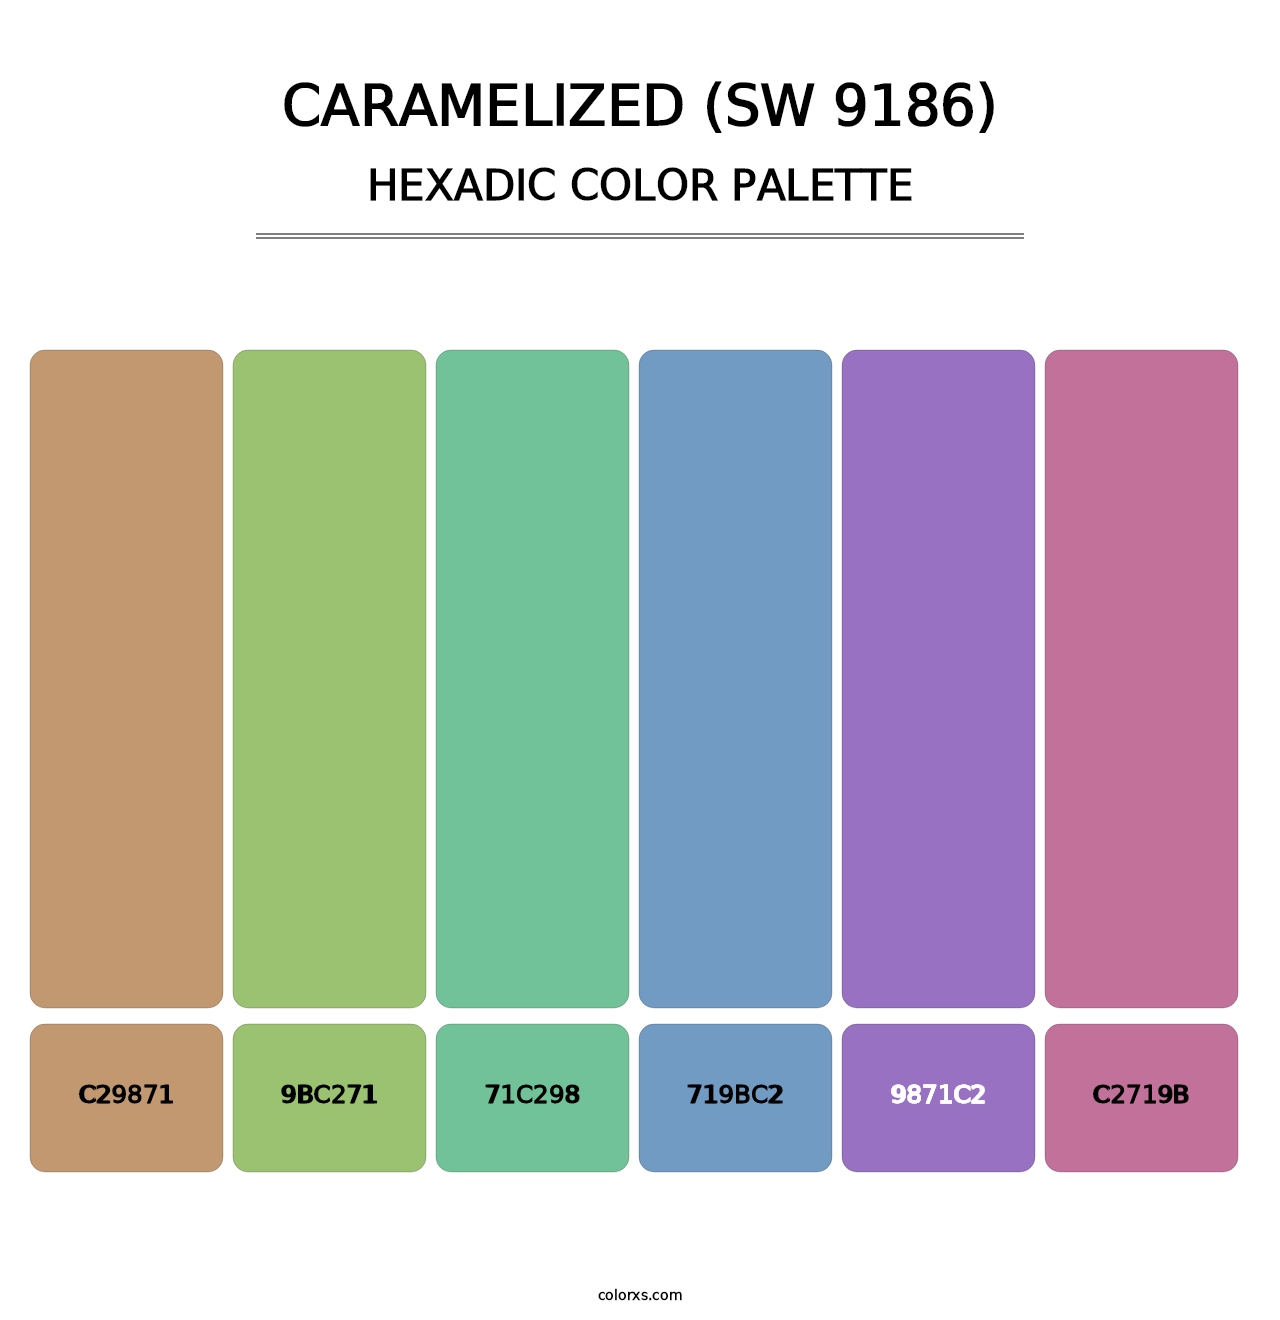 Caramelized (SW 9186) - Hexadic Color Palette